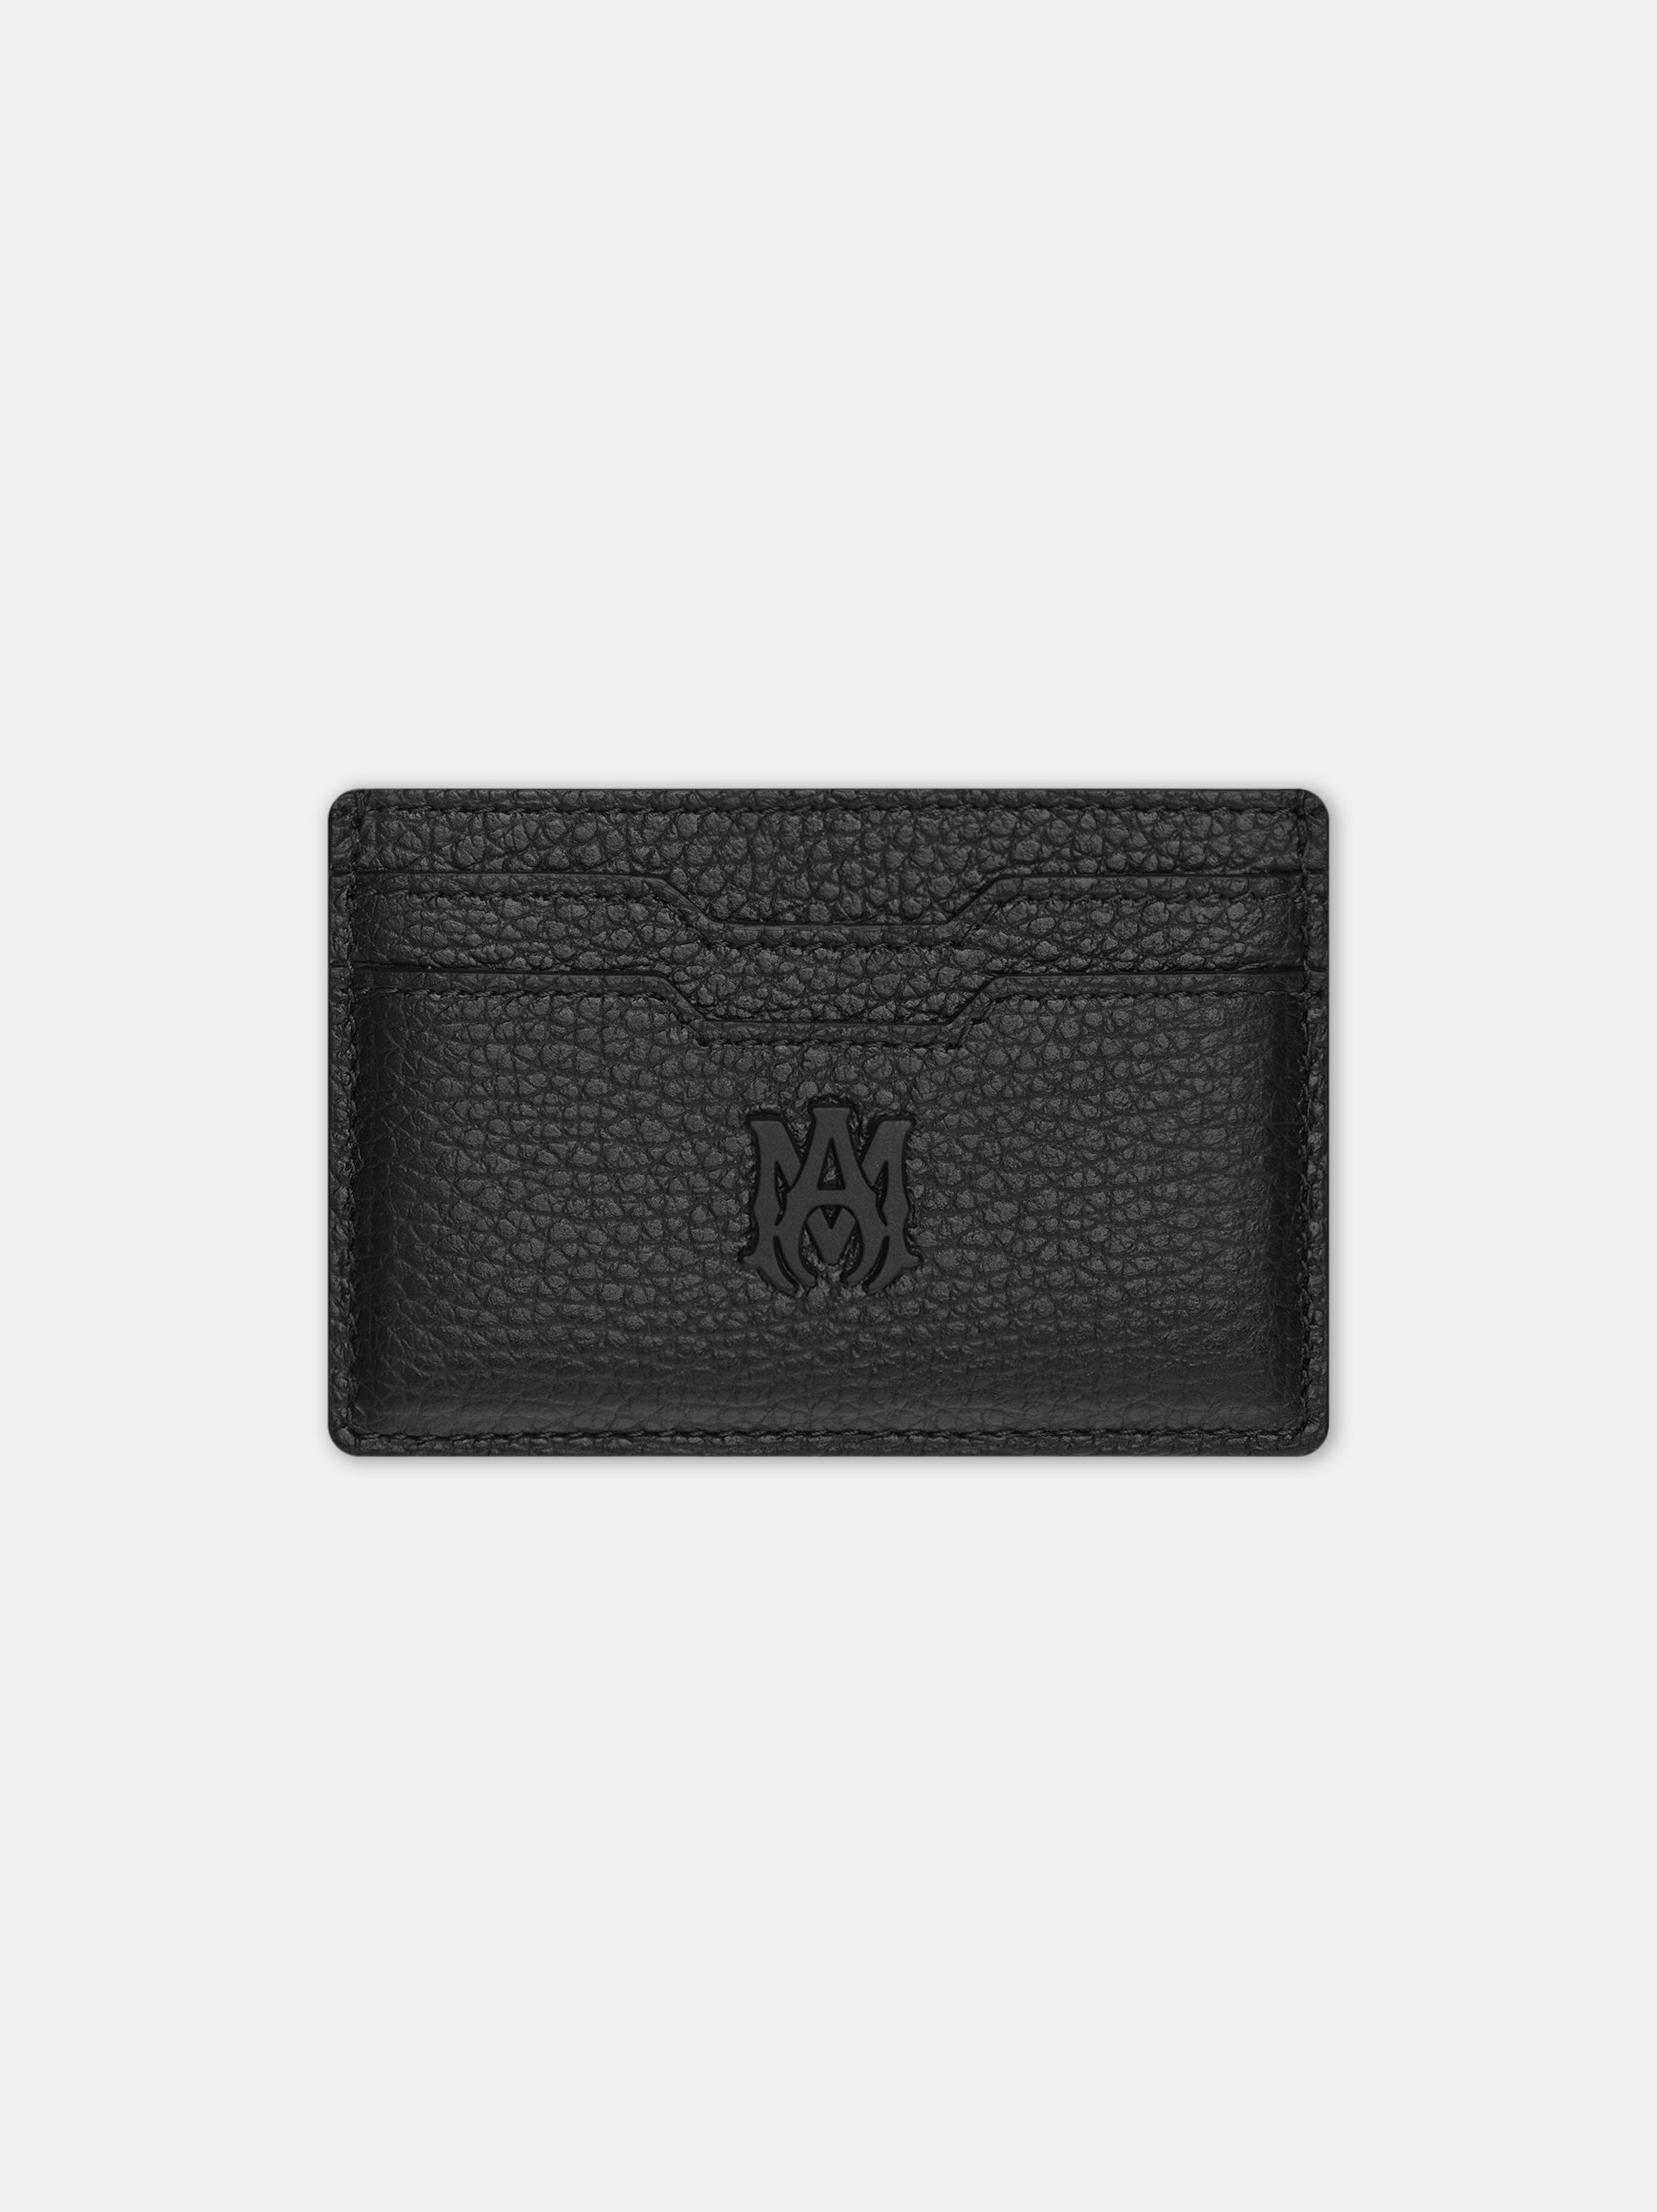 Product MA CARD HOLDER - Black featured image